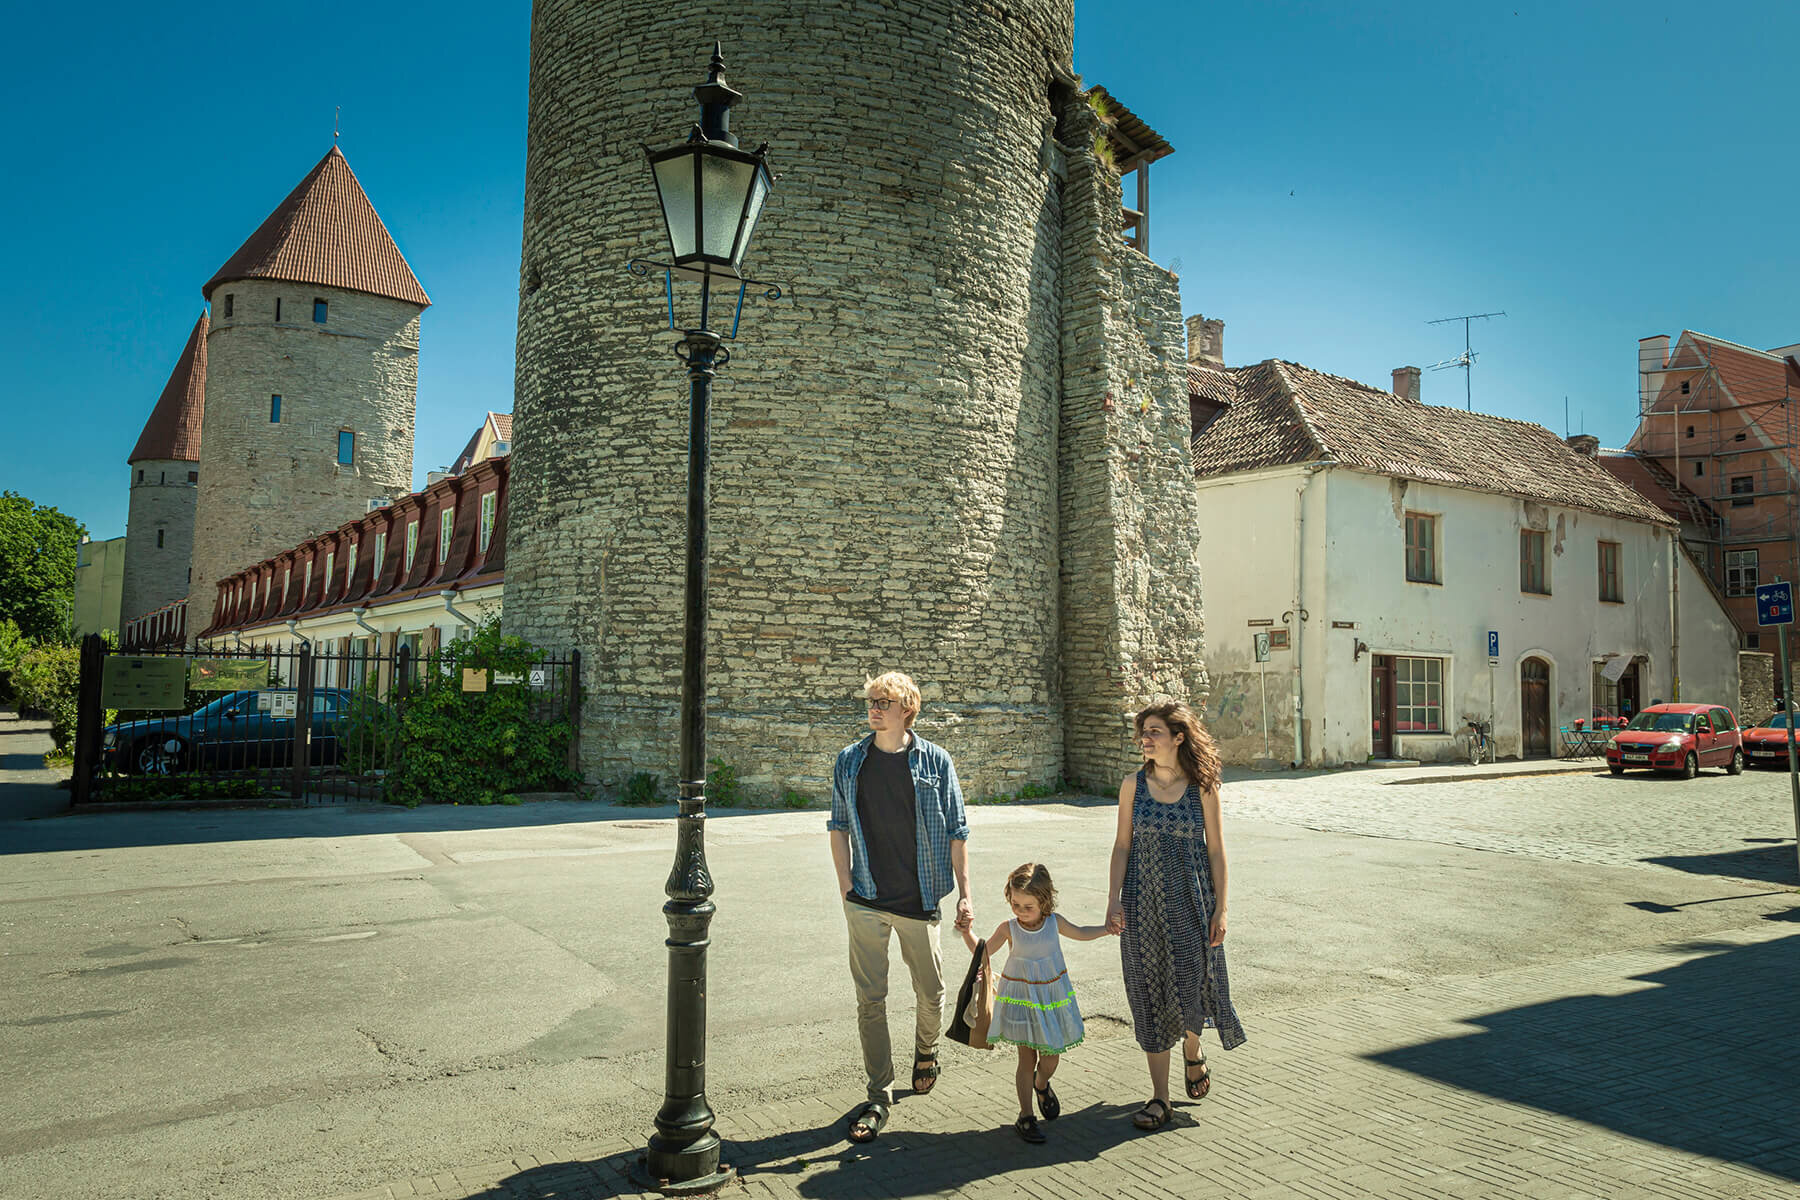 Get the best of Tallinn with a family photoshoot